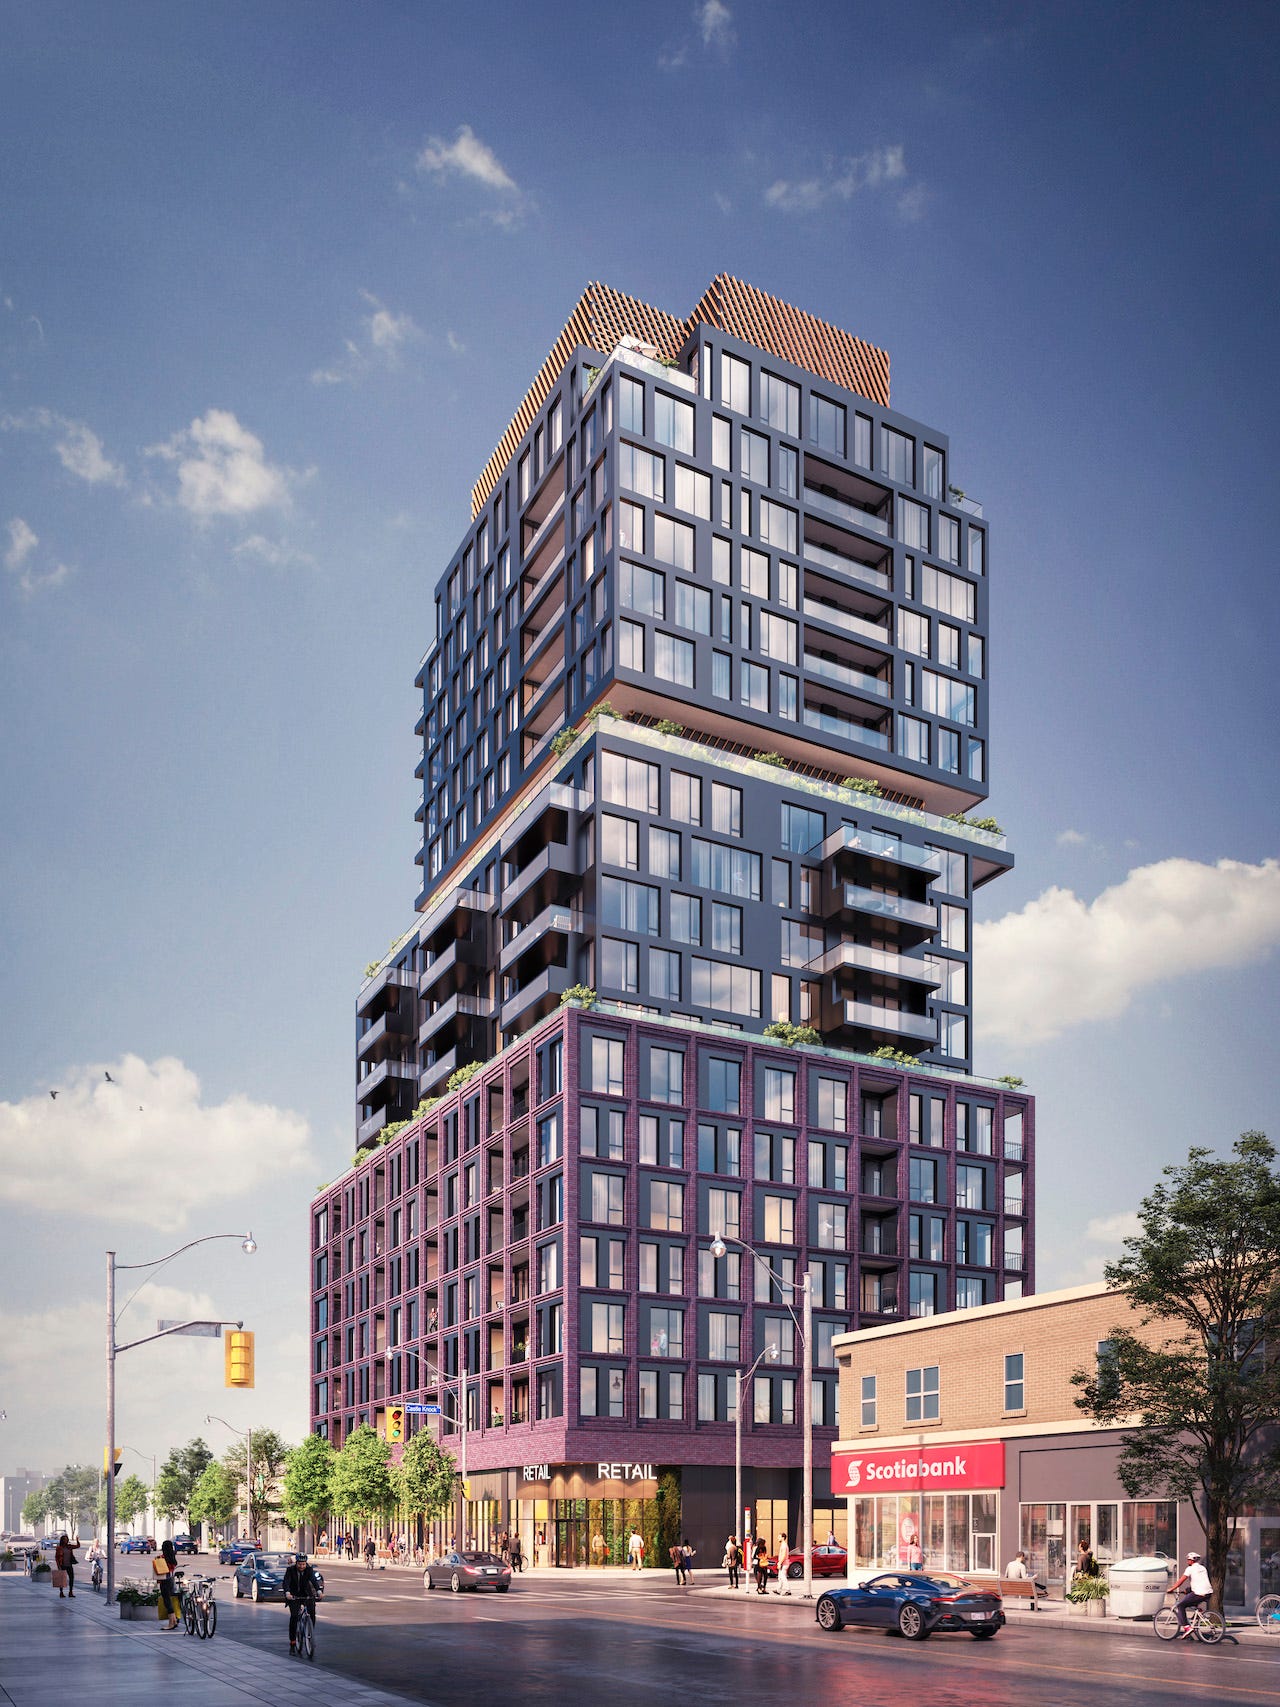 446 Eglinton West, Toronto, designed by Core Architects for Arista Homes